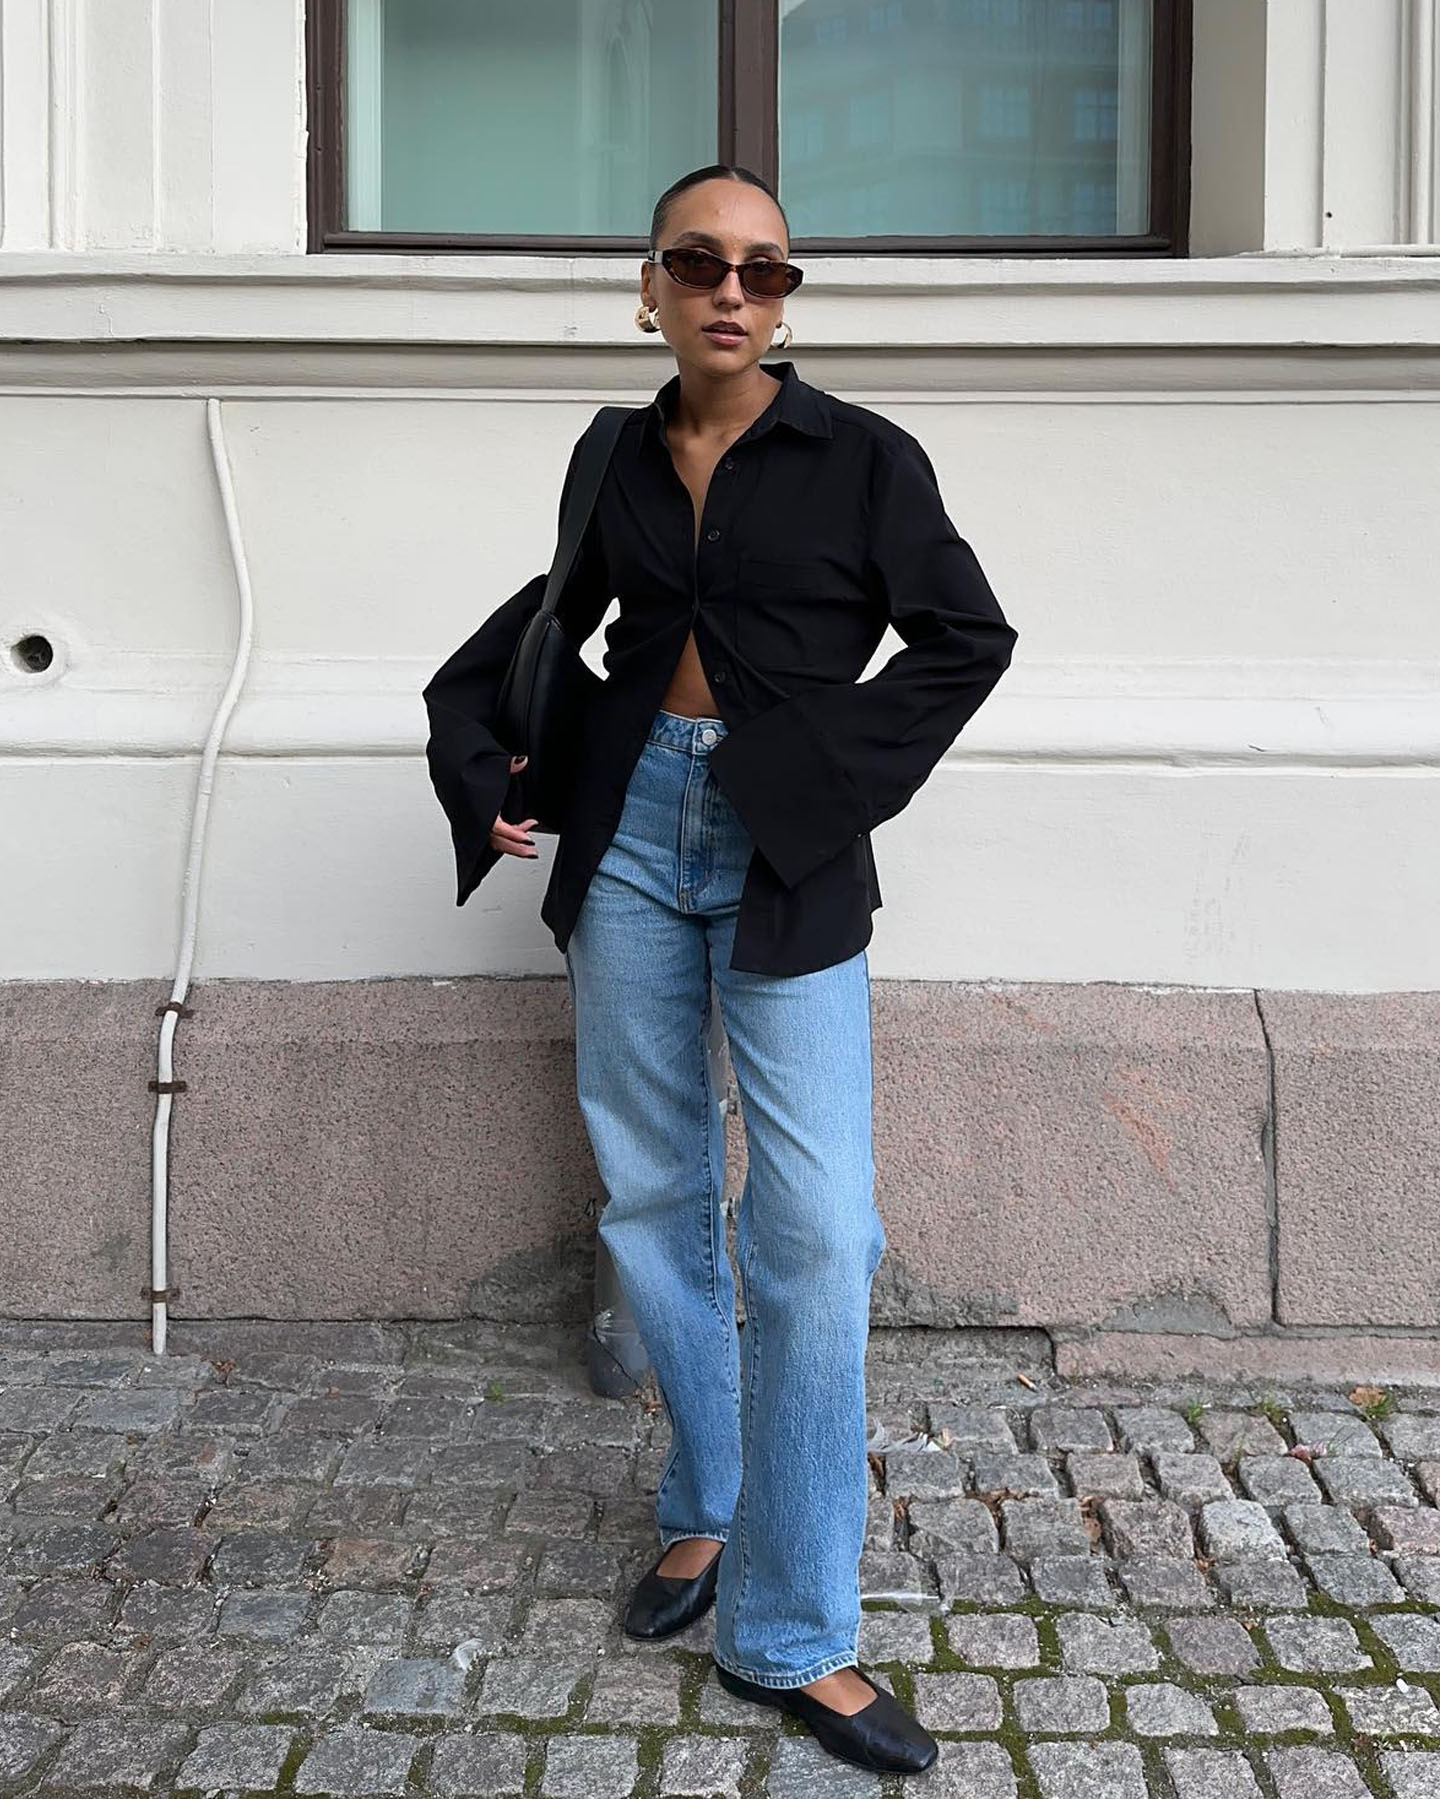 fashion influencer Ingrid Edvinsen poses on the street wearing hoop earrings, oval sunglasses, a black button-down shirt, jeans, and ballet flats